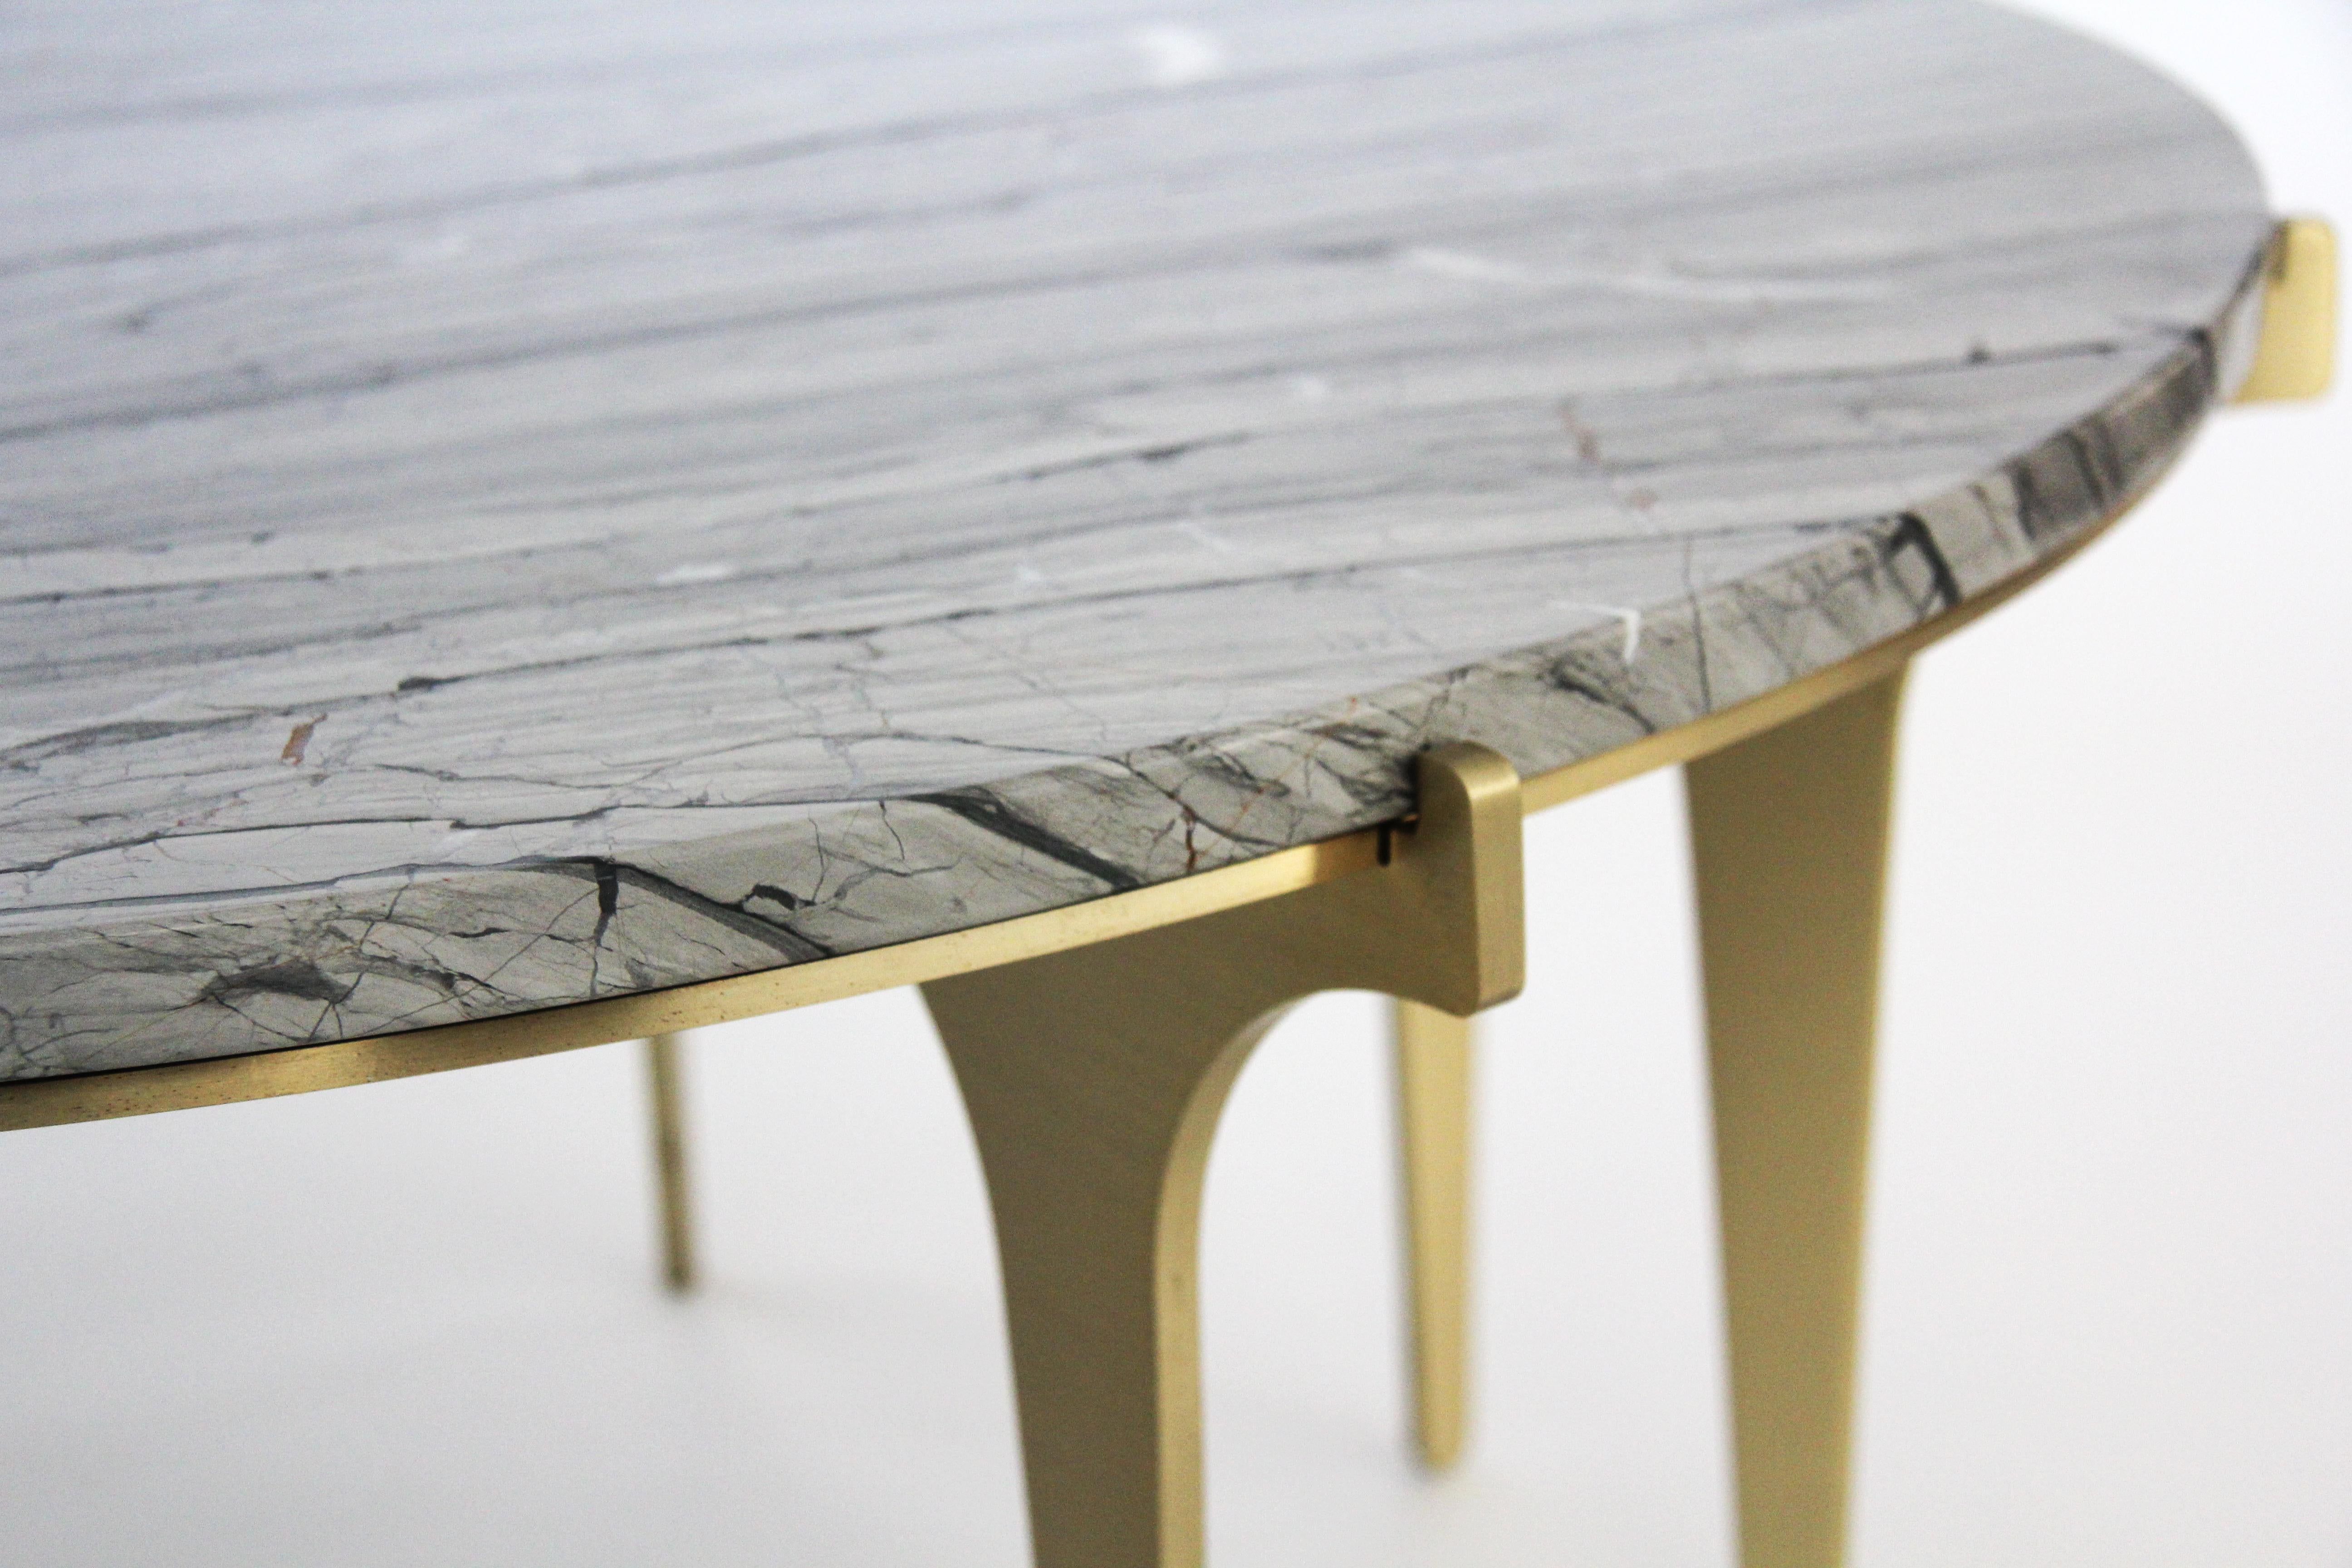 With the same lightweight feel found throughout the PRONG series, this marble coffee table floating atop tall legs is available in blackened steel, satin brass, satin copper, or satin nickel with Grigio Carnico (black), Onda Argento (silver), and